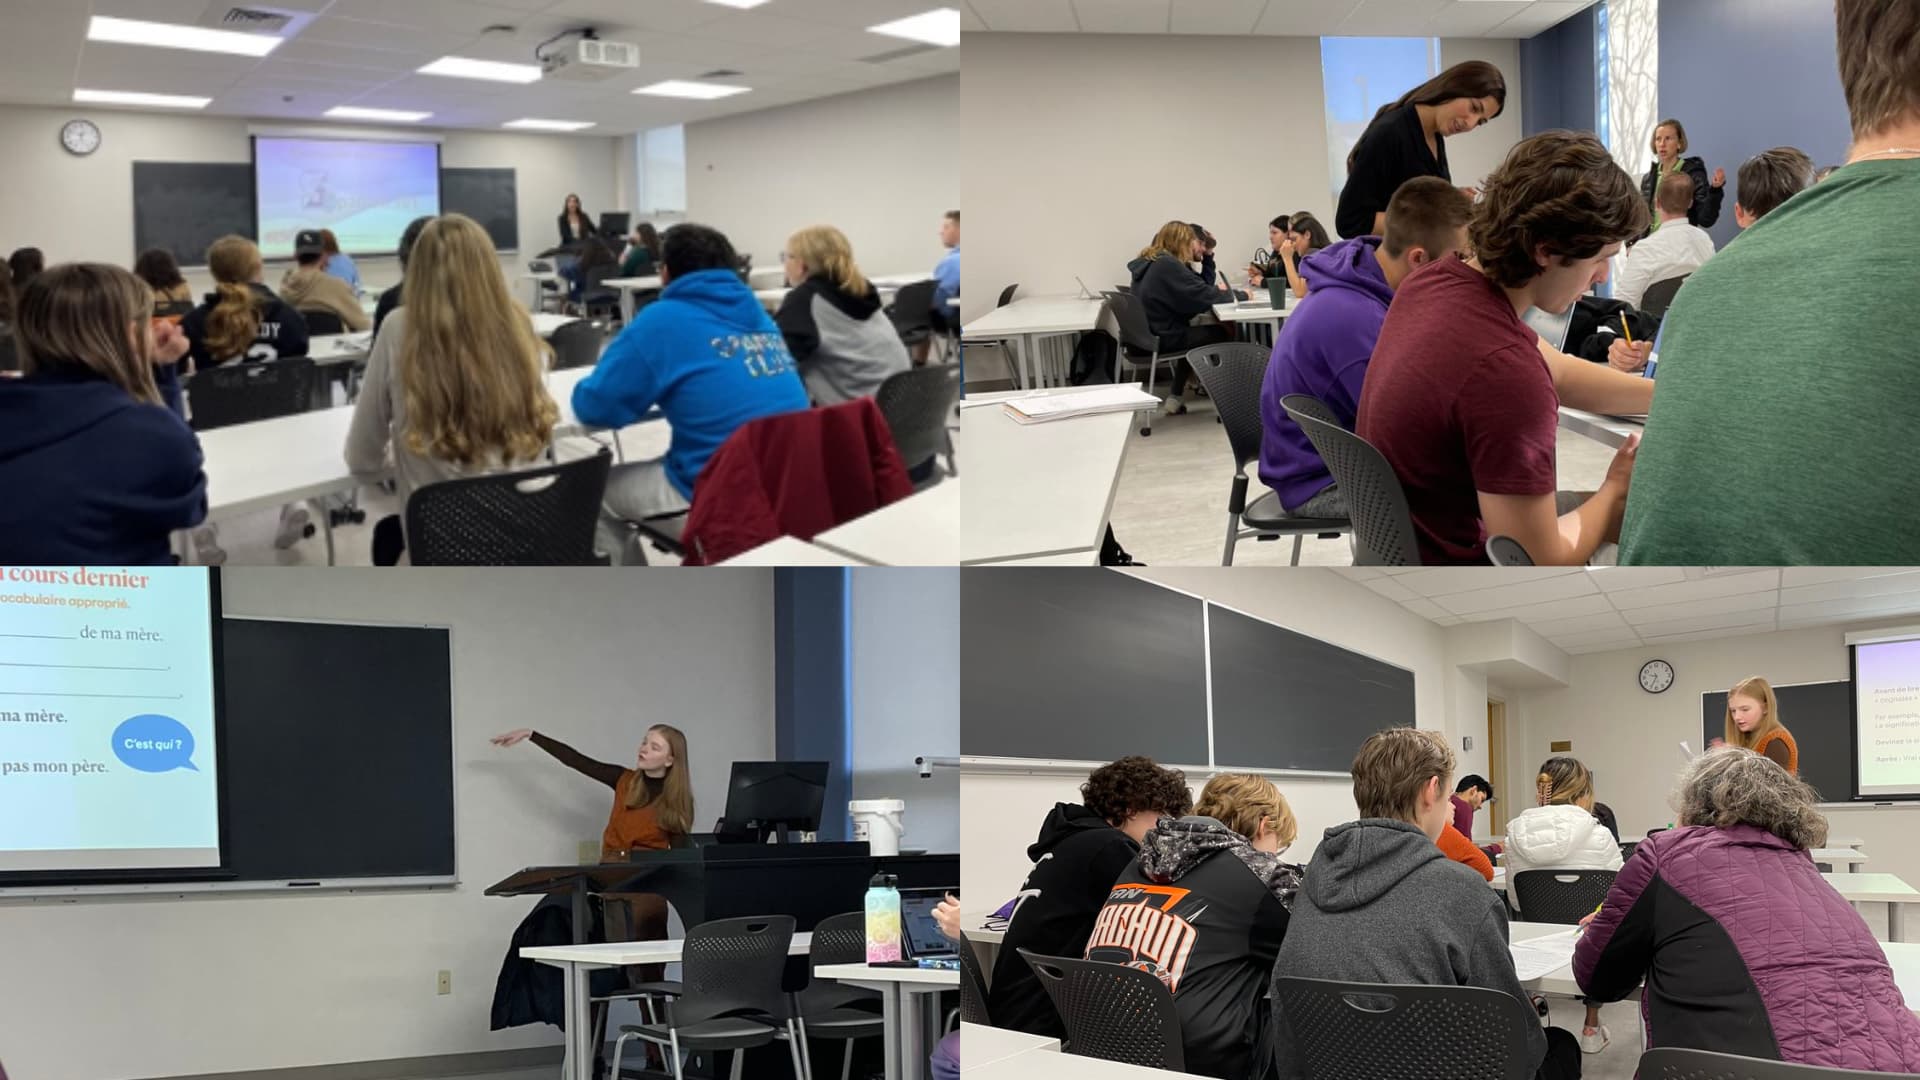 Every semester, over 50 high school students visit The University of Scranton to experience Language Immersion Day, shown. There they receive a campus tour, attend an interactive language class and take part in Language Center activities.